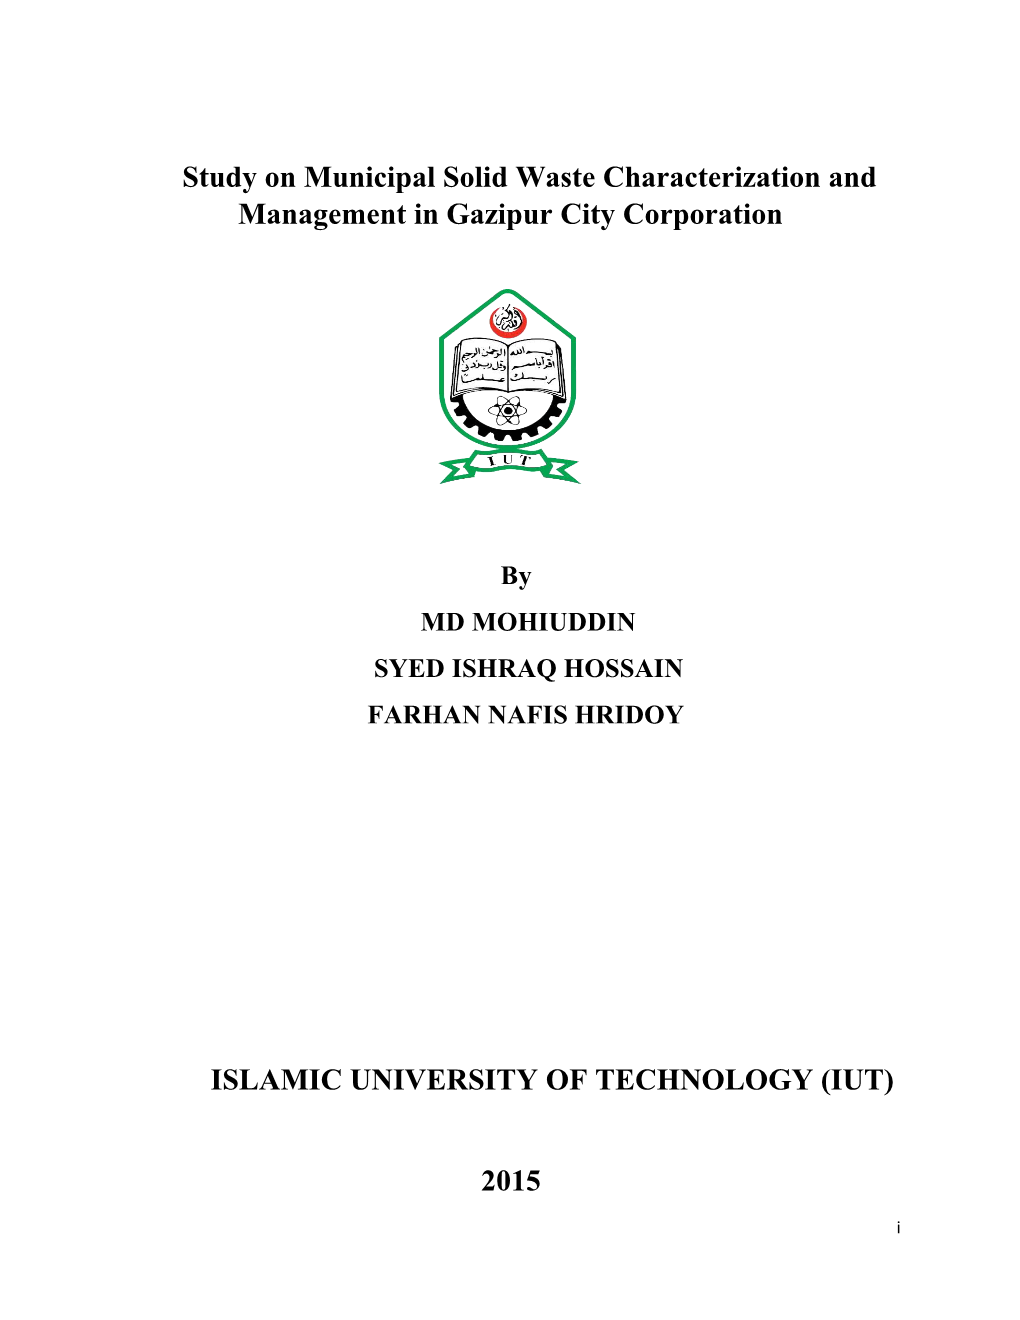 Study on Municipal Solid Waste Characterization and Management in Gazipur City Corporation